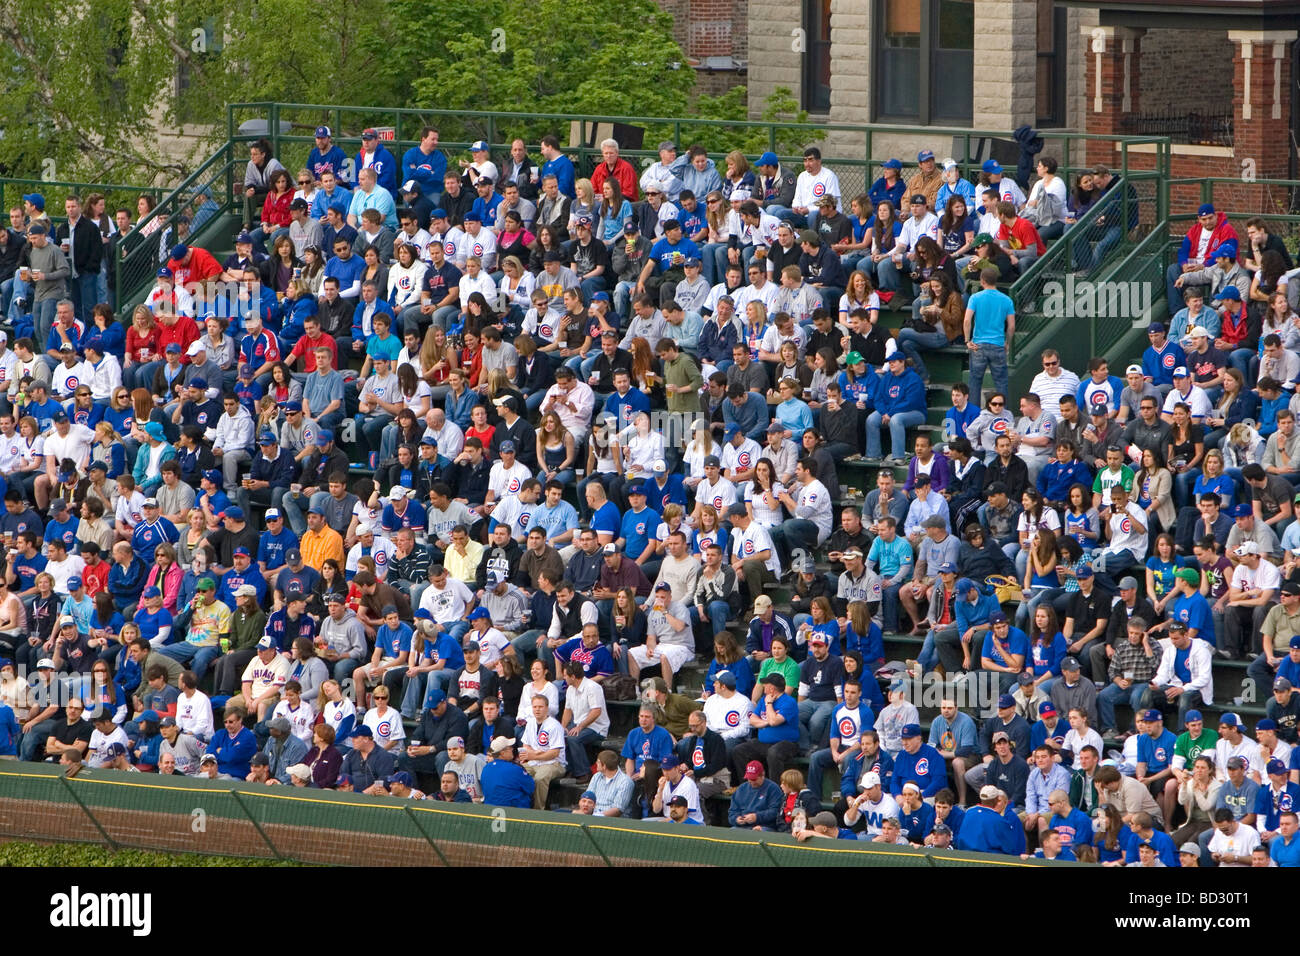 Fans in bleachers watch a Cubs baseball game at Wrigley Field in Chicago Illinois USA  Stock Photo